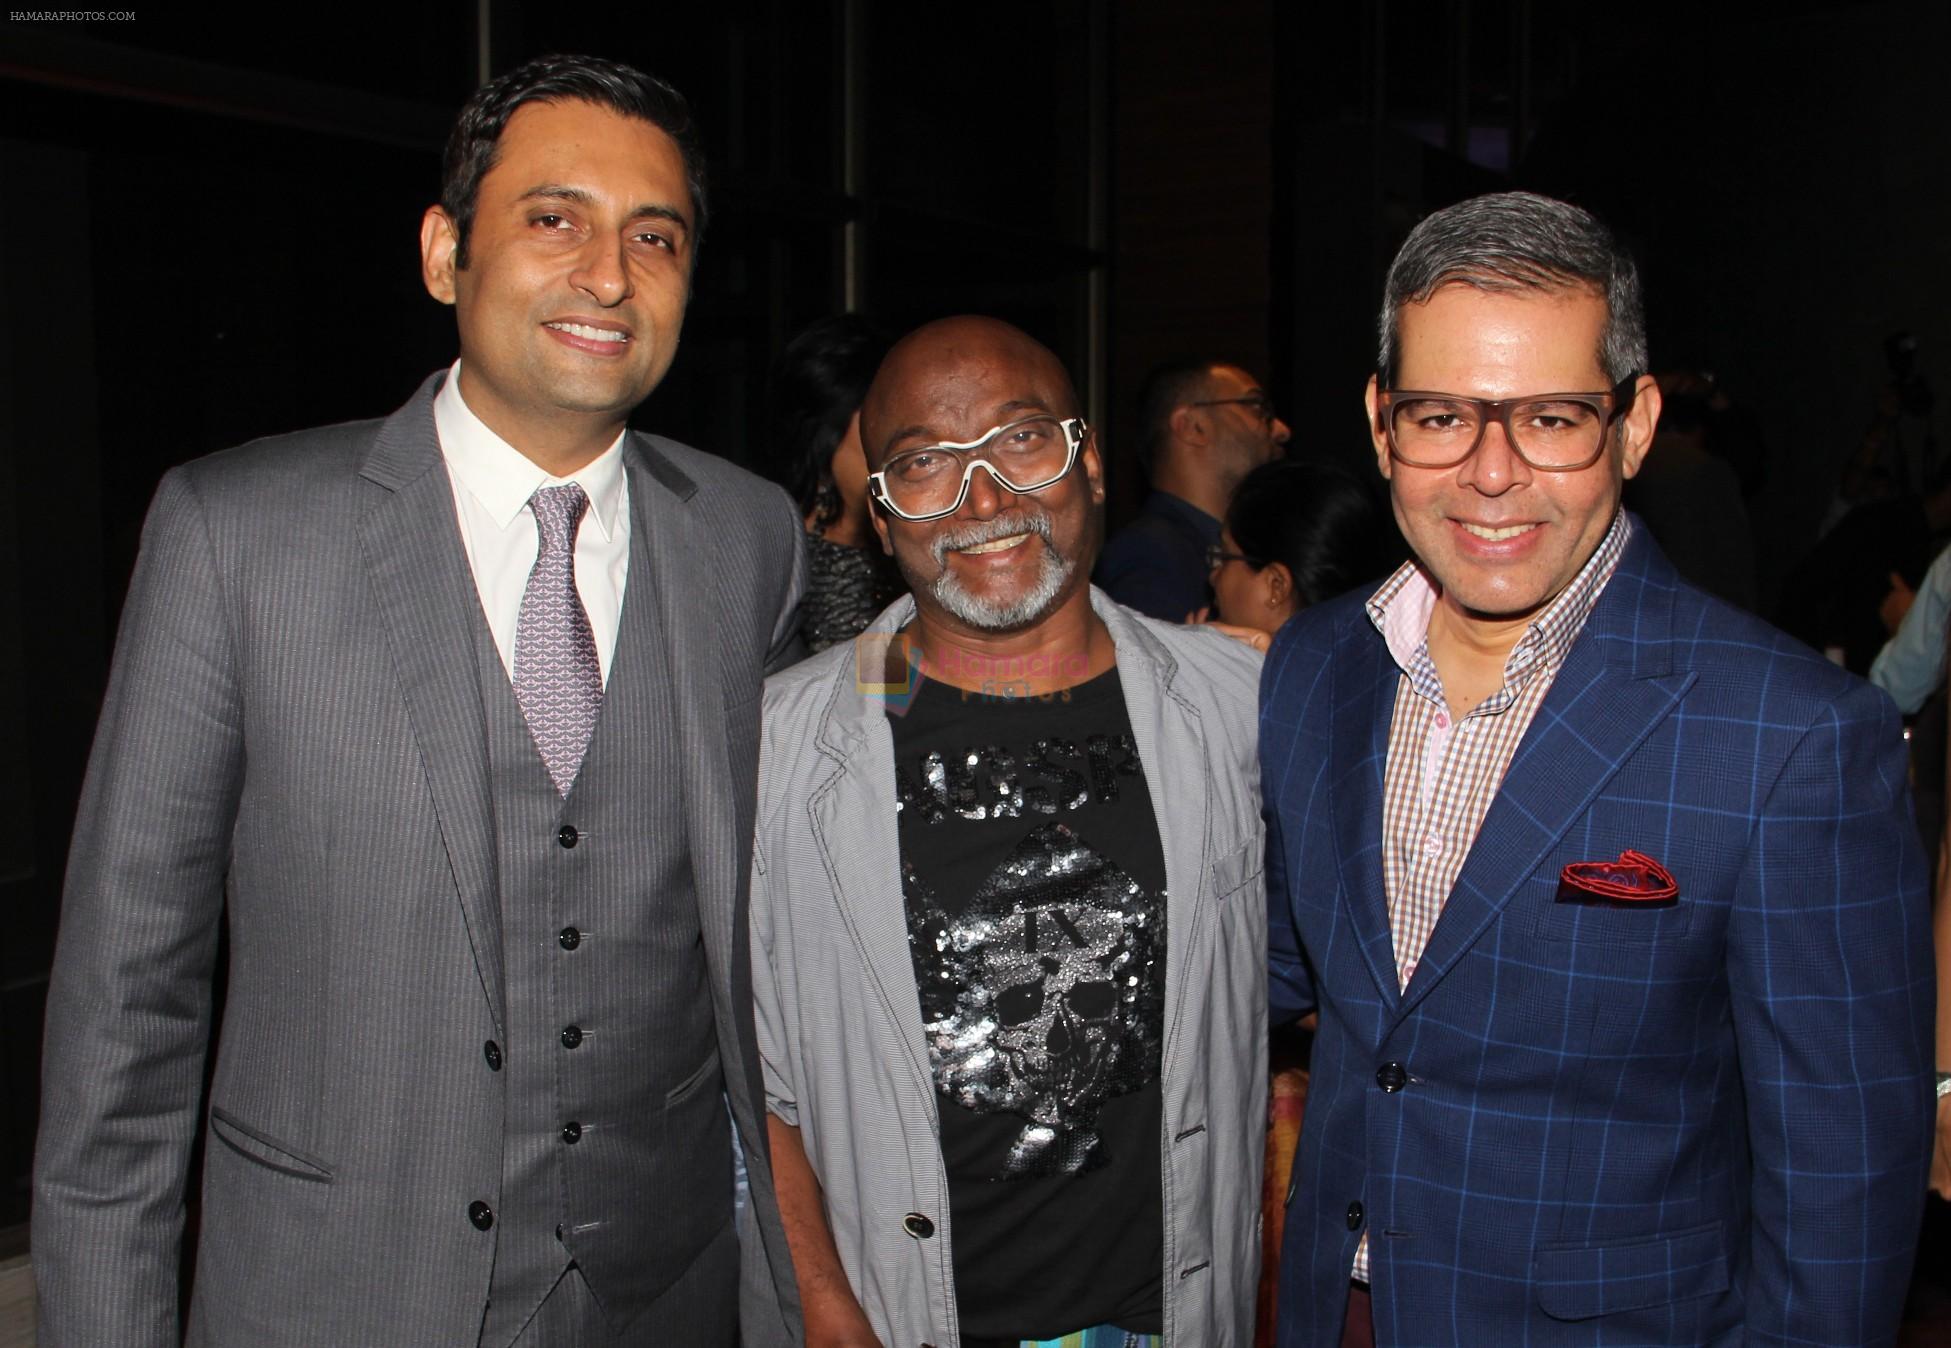 Conde Nast Traveller India's 5th anniversary celebrations with   _Journeys of a Lifetime_, St Regis, Mumbai